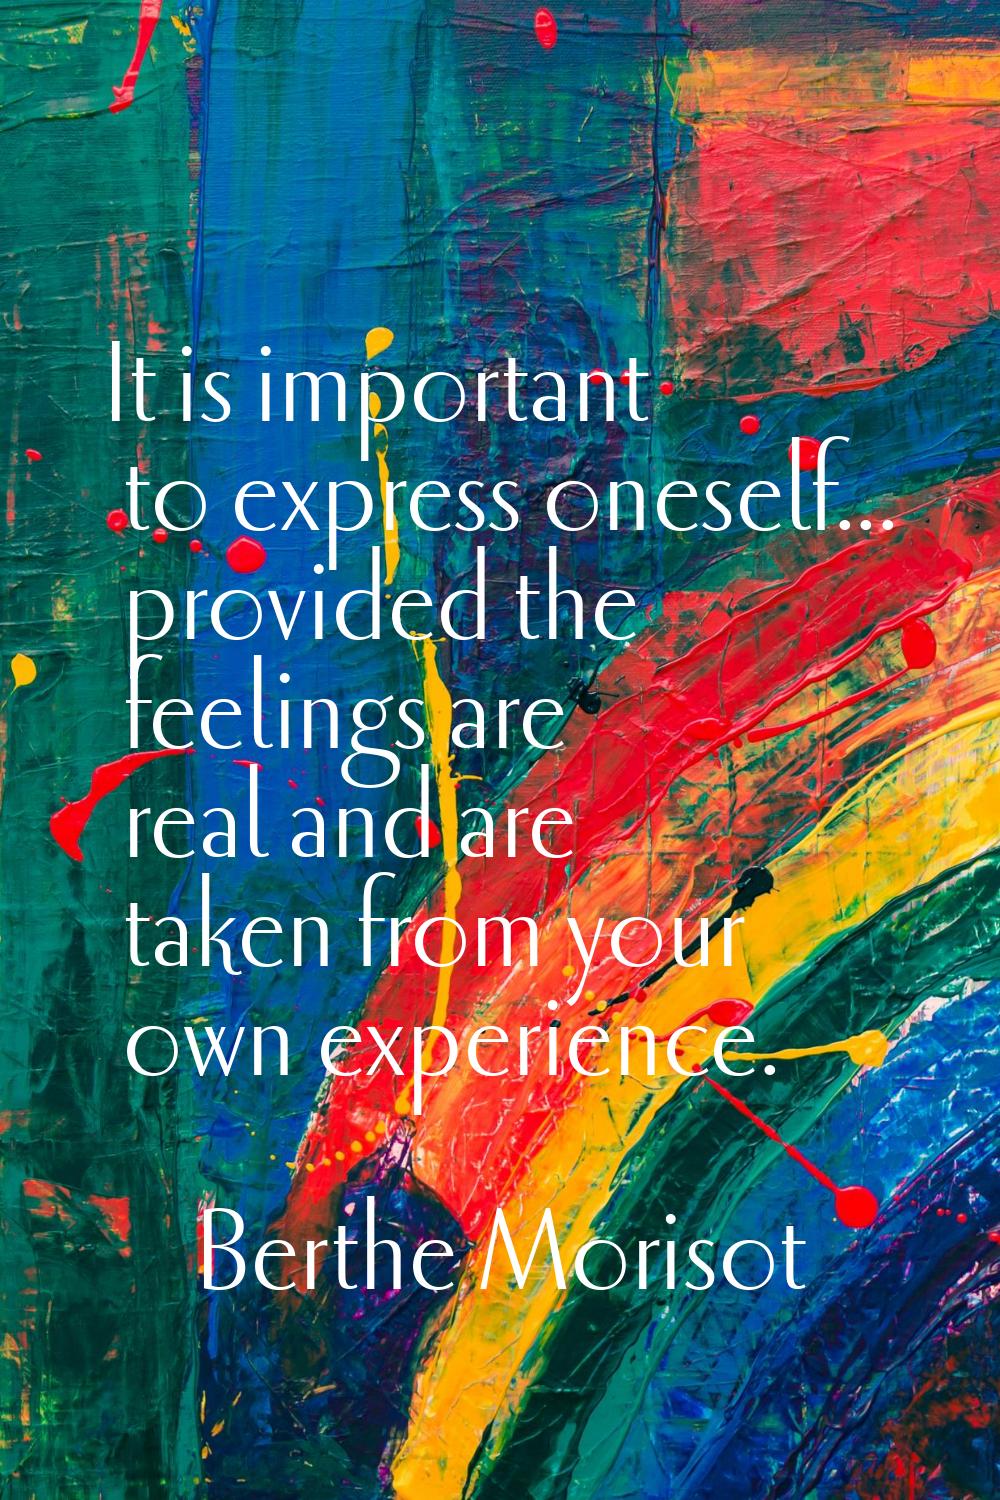 It is important to express oneself... provided the feelings are real and are taken from your own ex